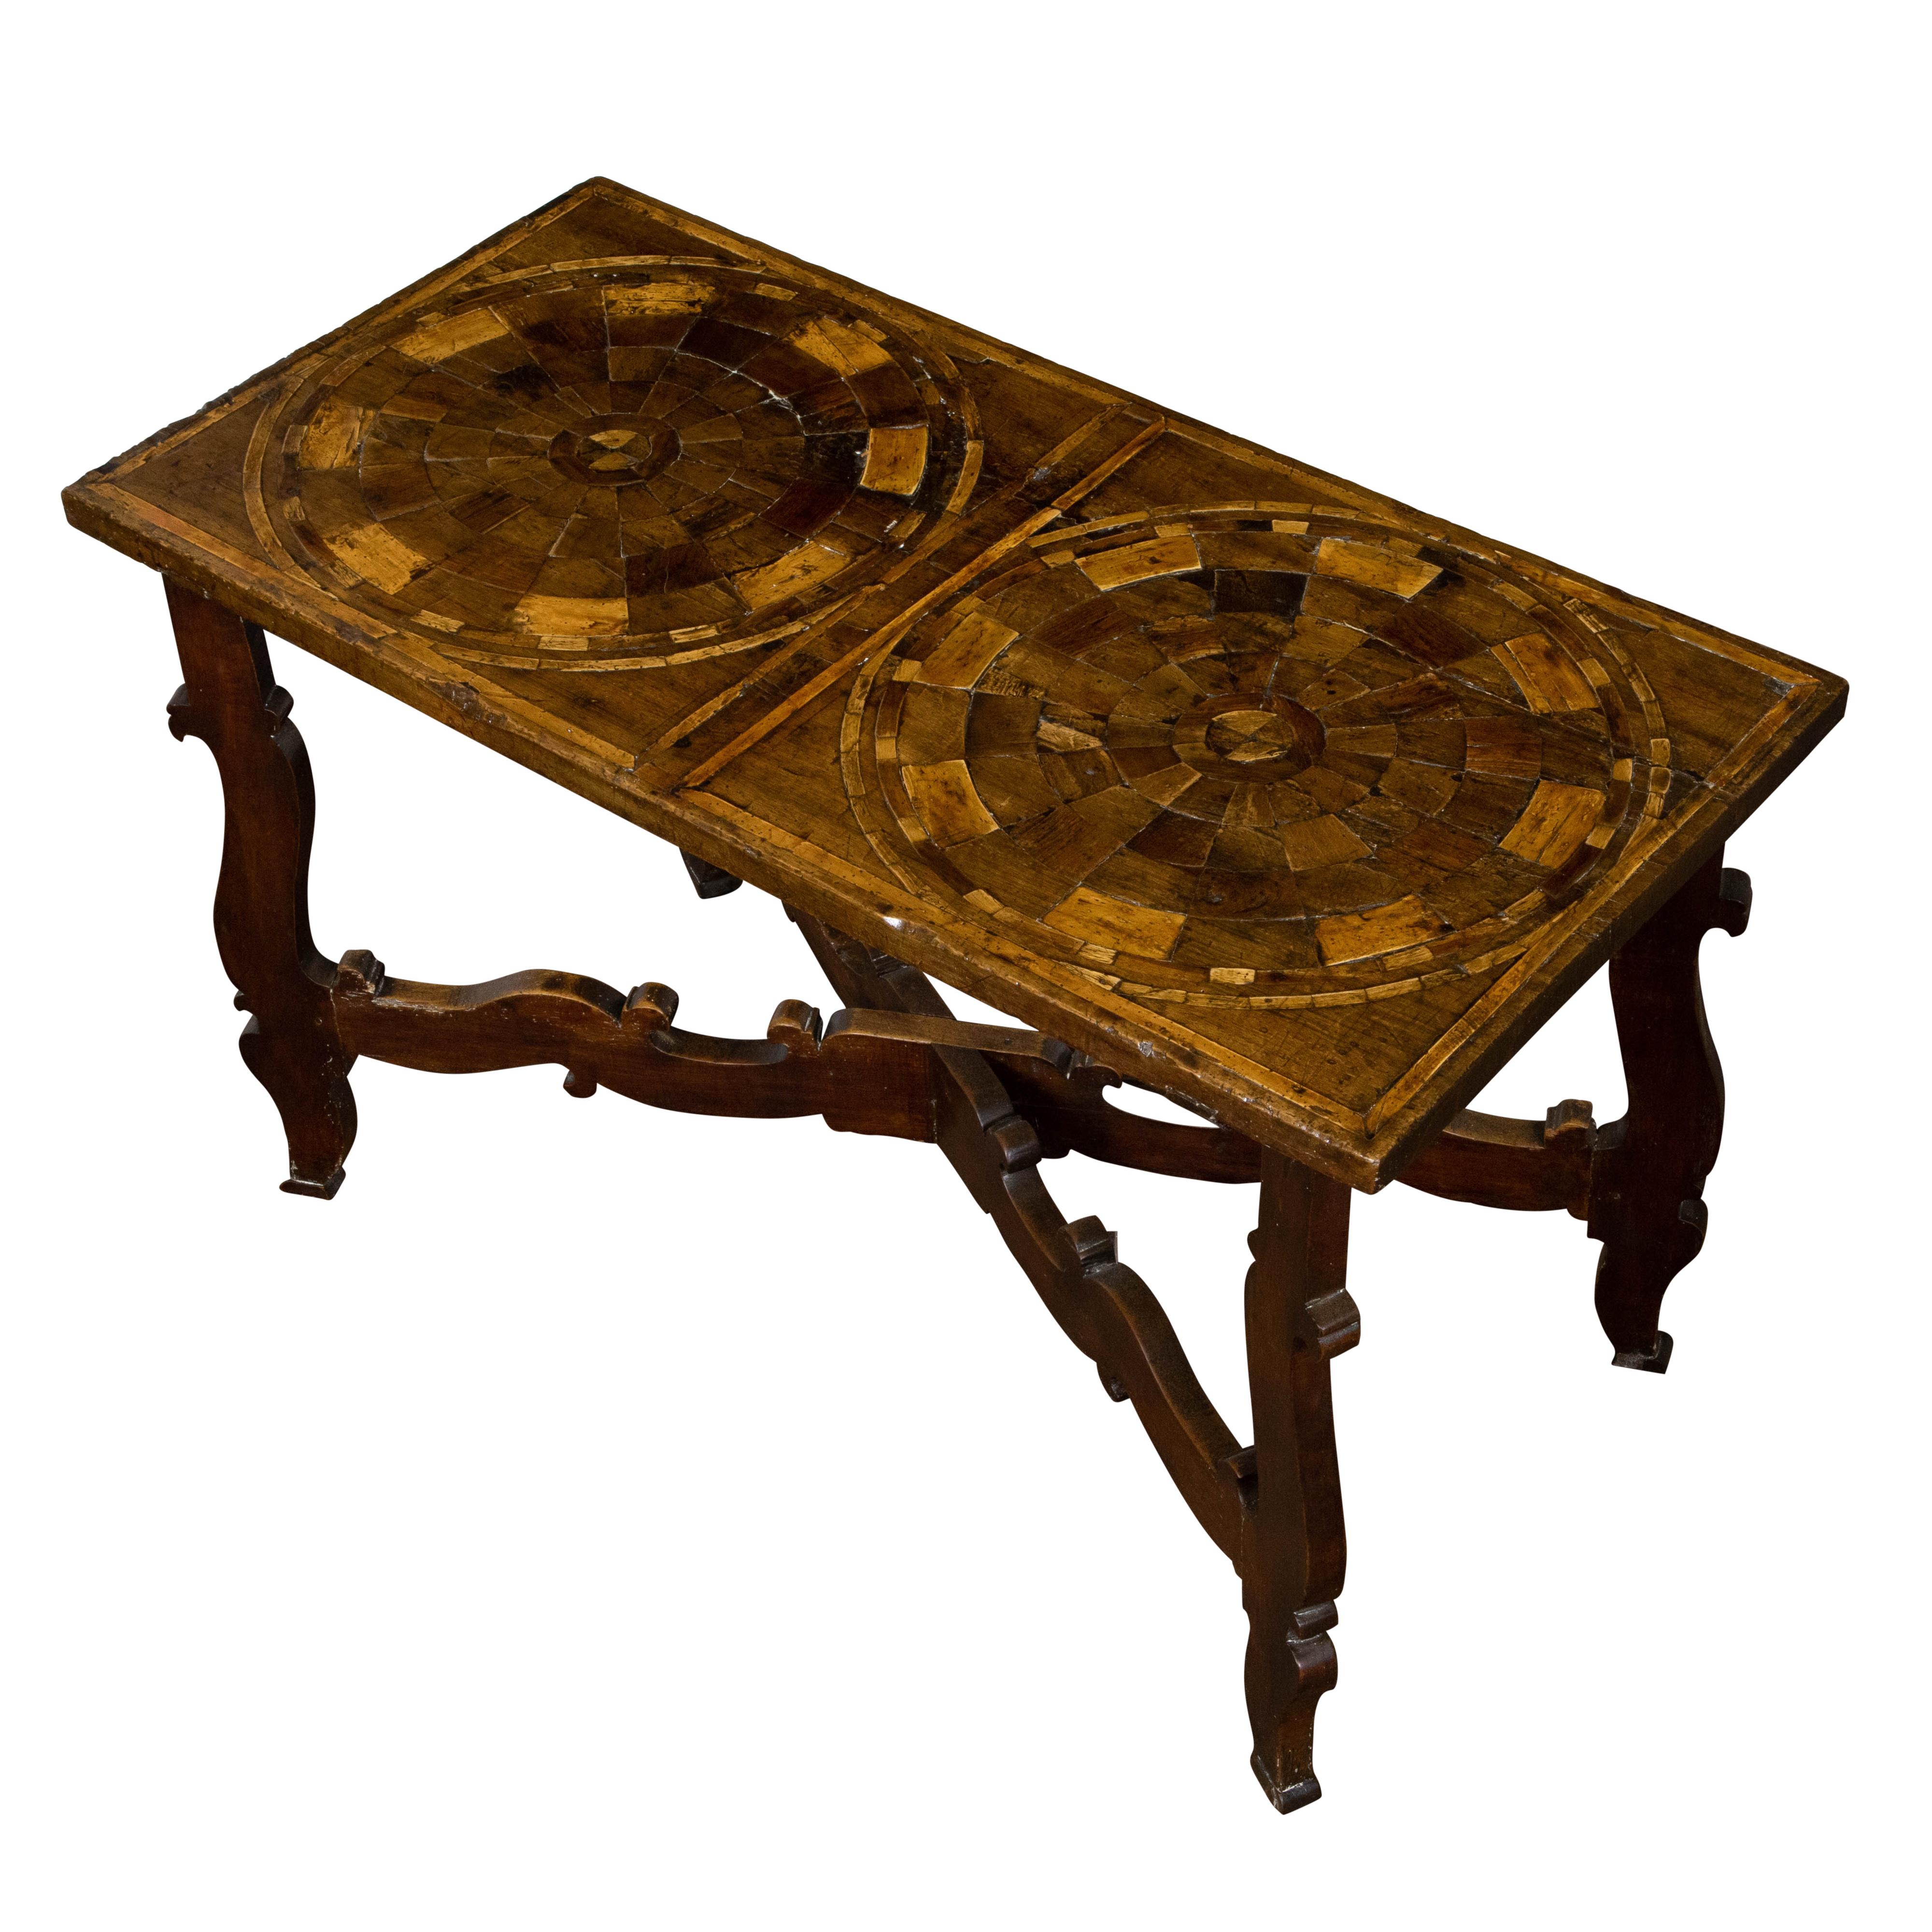 Italian 18th Century Baroque Style Carved Walnut Table with Marquetry Décor For Sale 3